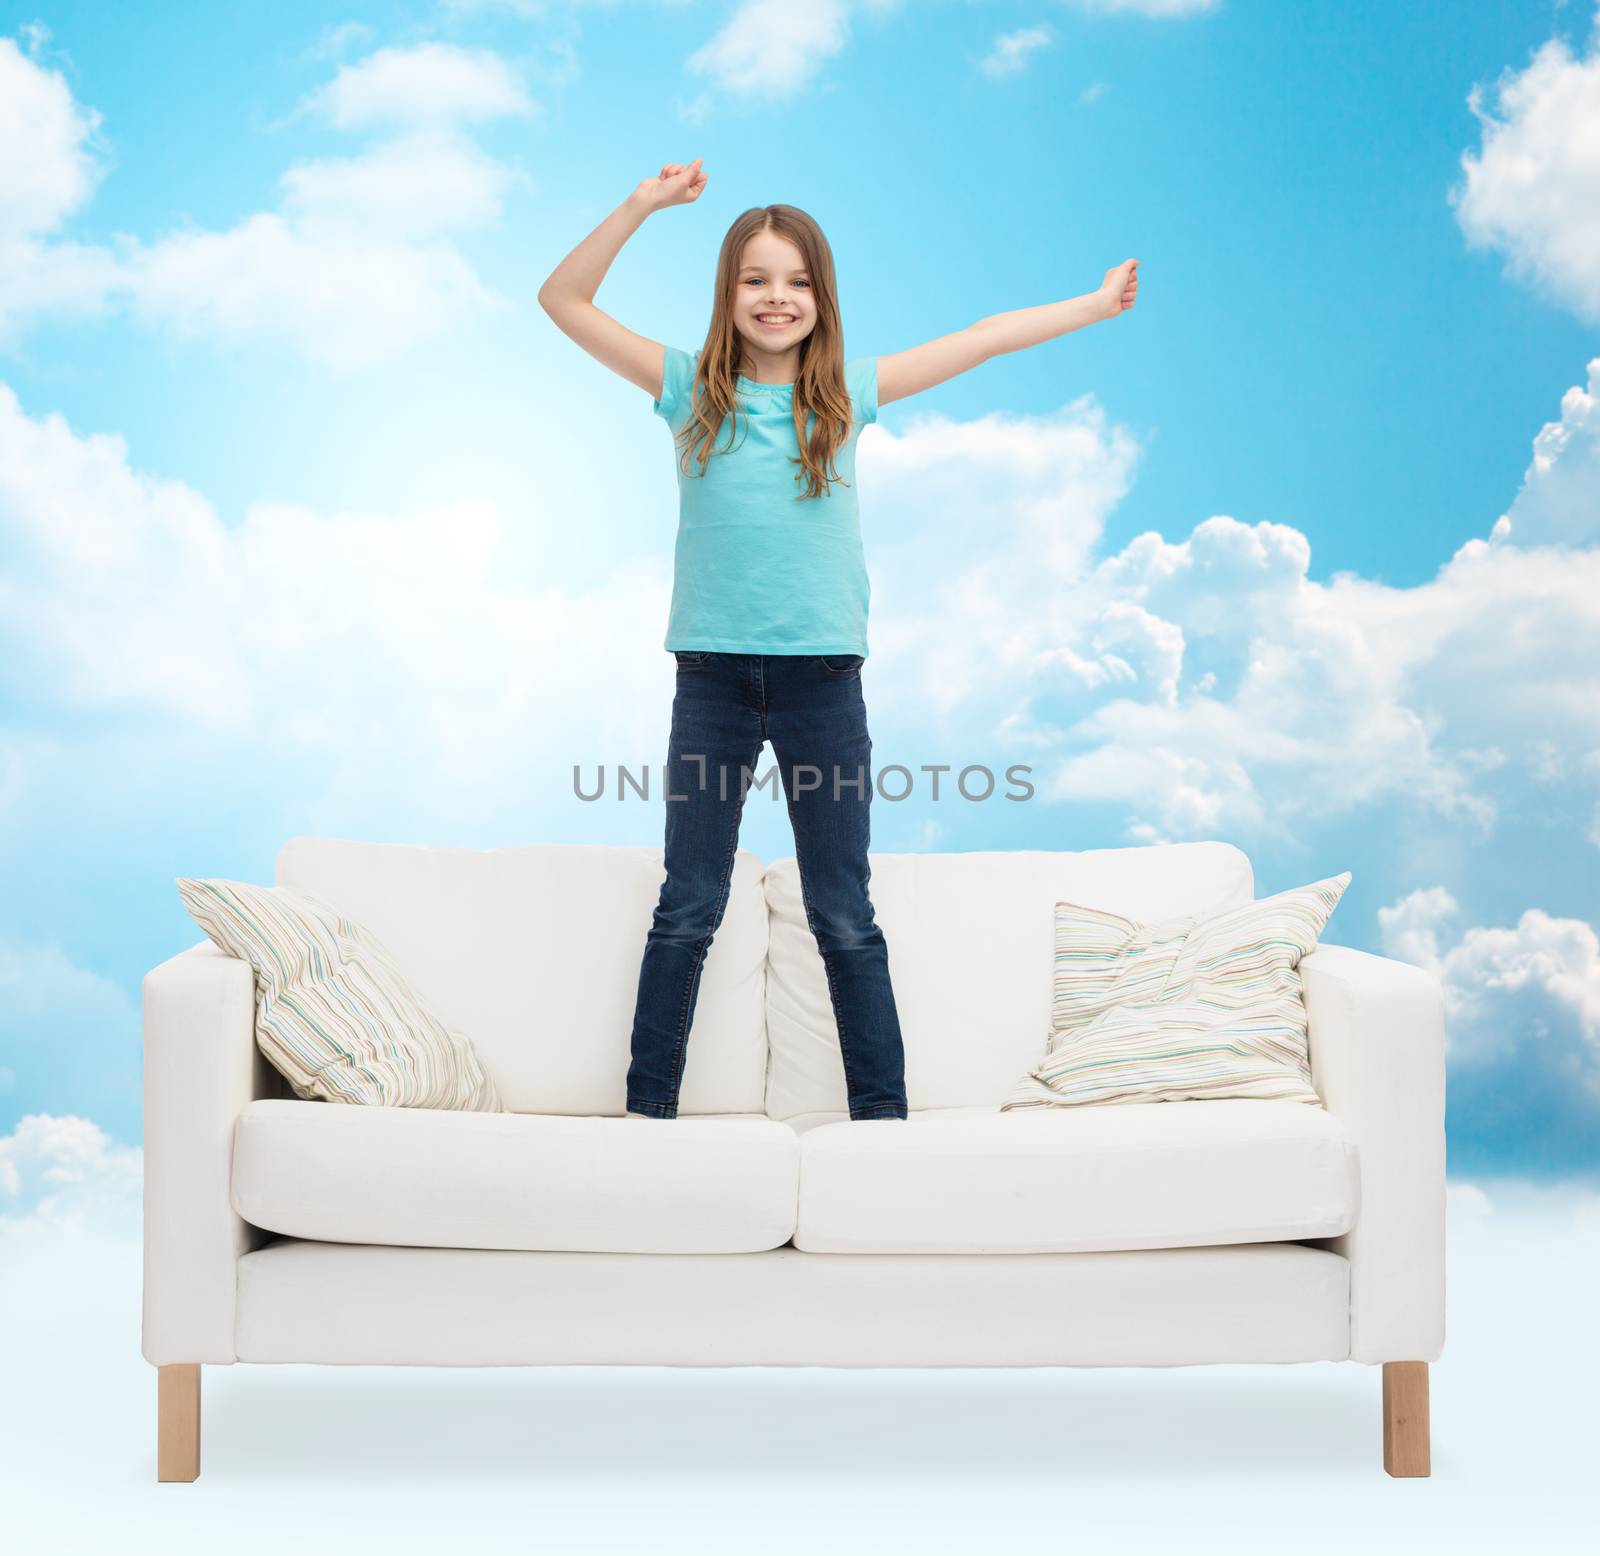 home, leisure, people and happiness concept - smiling little girl jumping and dancing on sofa over blue sky and white clouds background